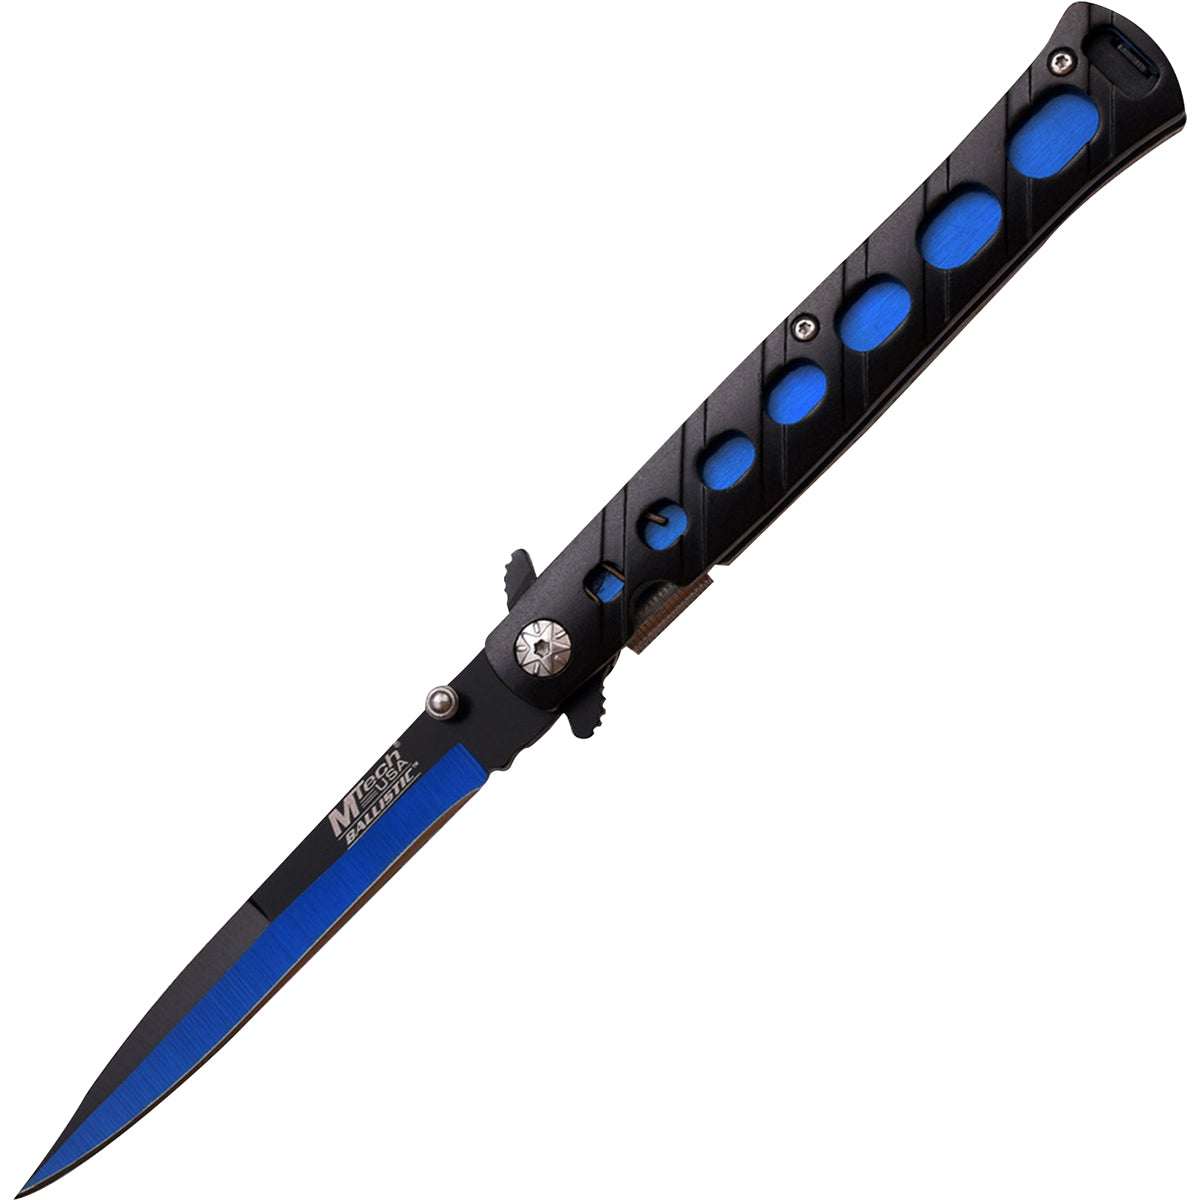 MTech USA Rescue Linerlock Spring Assisted Tanto Folding Knife, Blue, MT-A317BL M-Tech